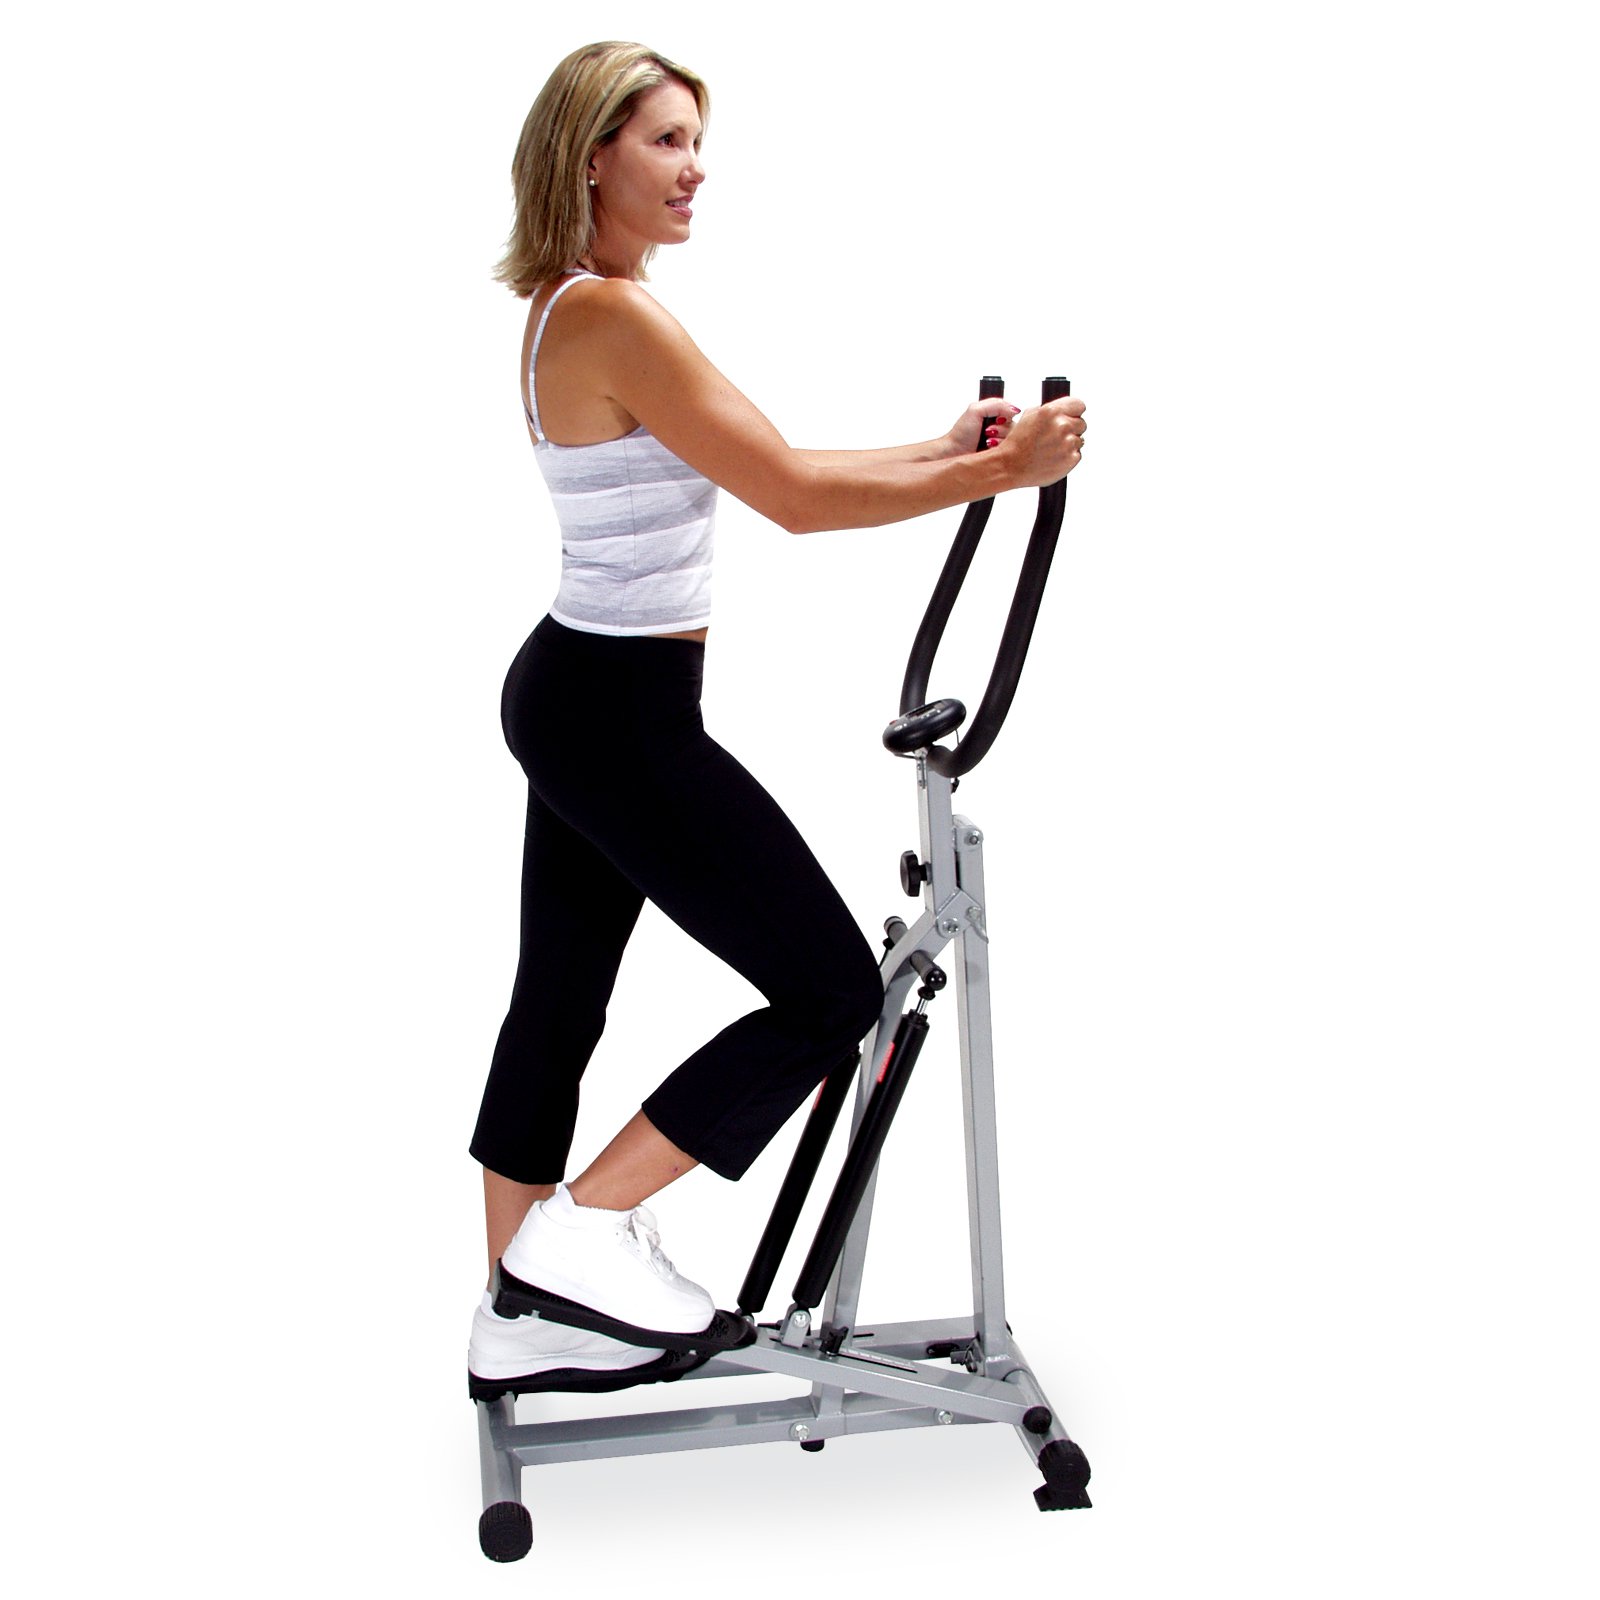 Stamina Products 40-0069 Spacemate Adjustable Folding Fitness Stepper - image 3 of 3